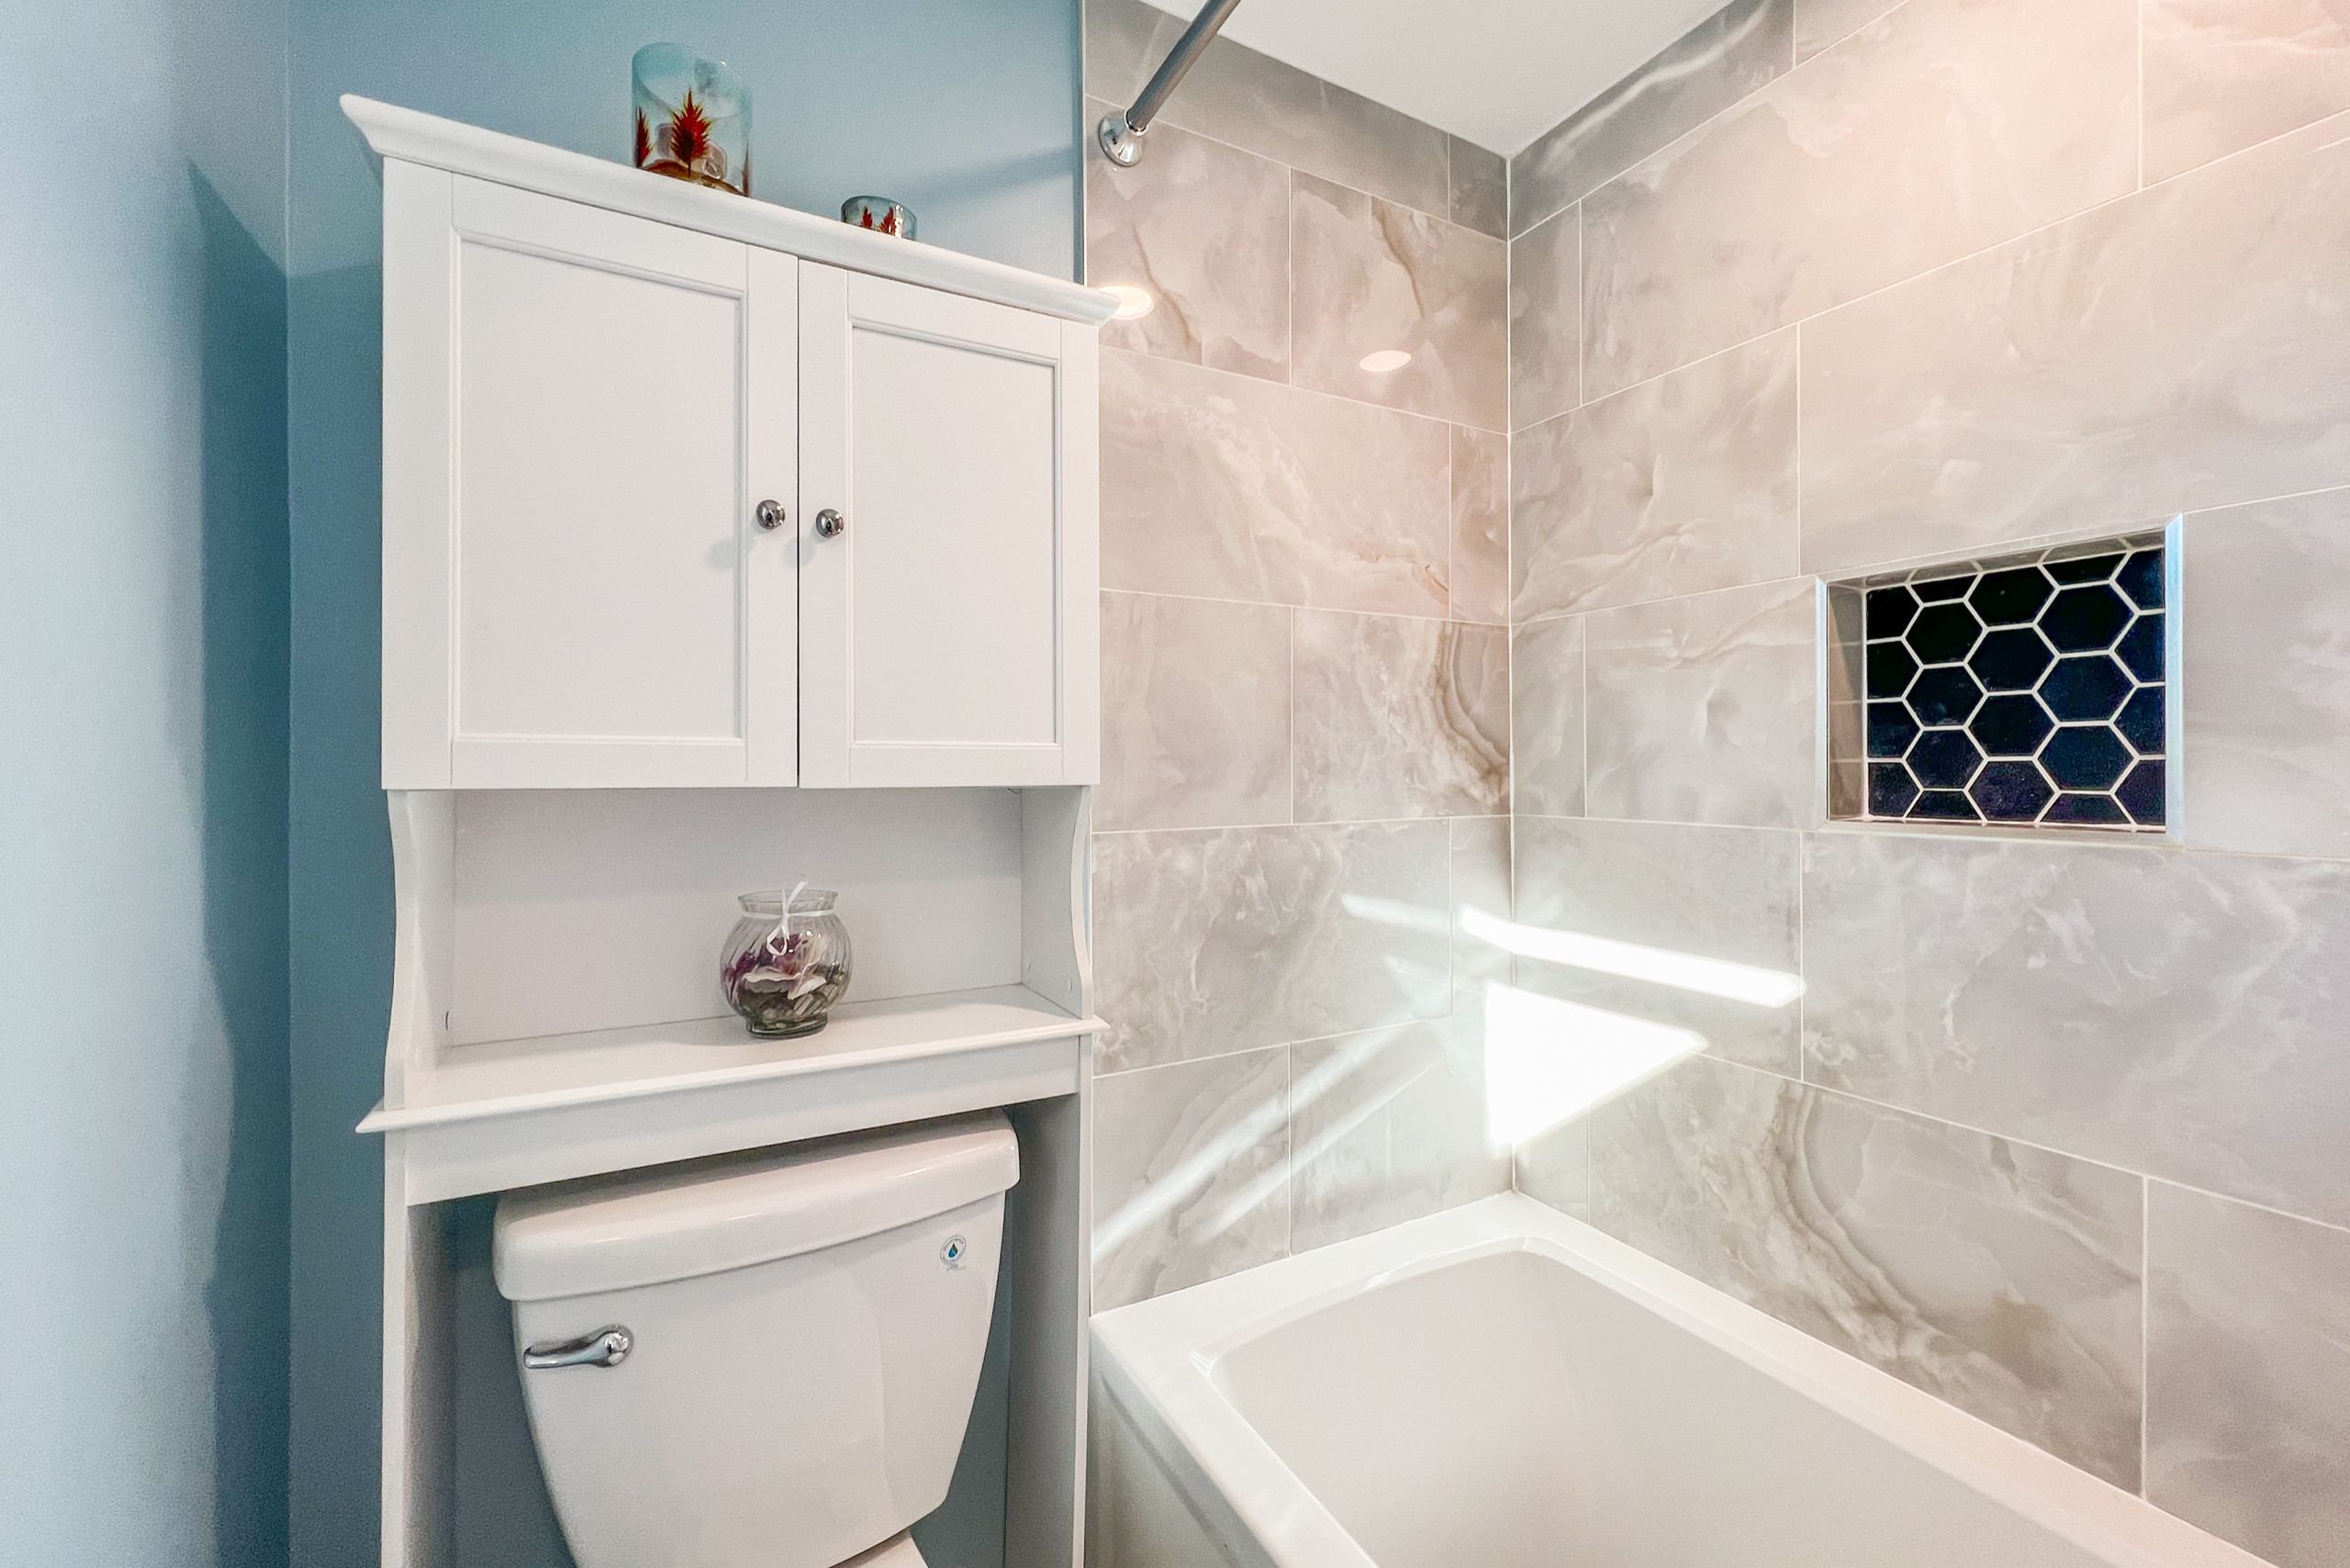 Featured Projects - Bathroom Renovation in Branchburg